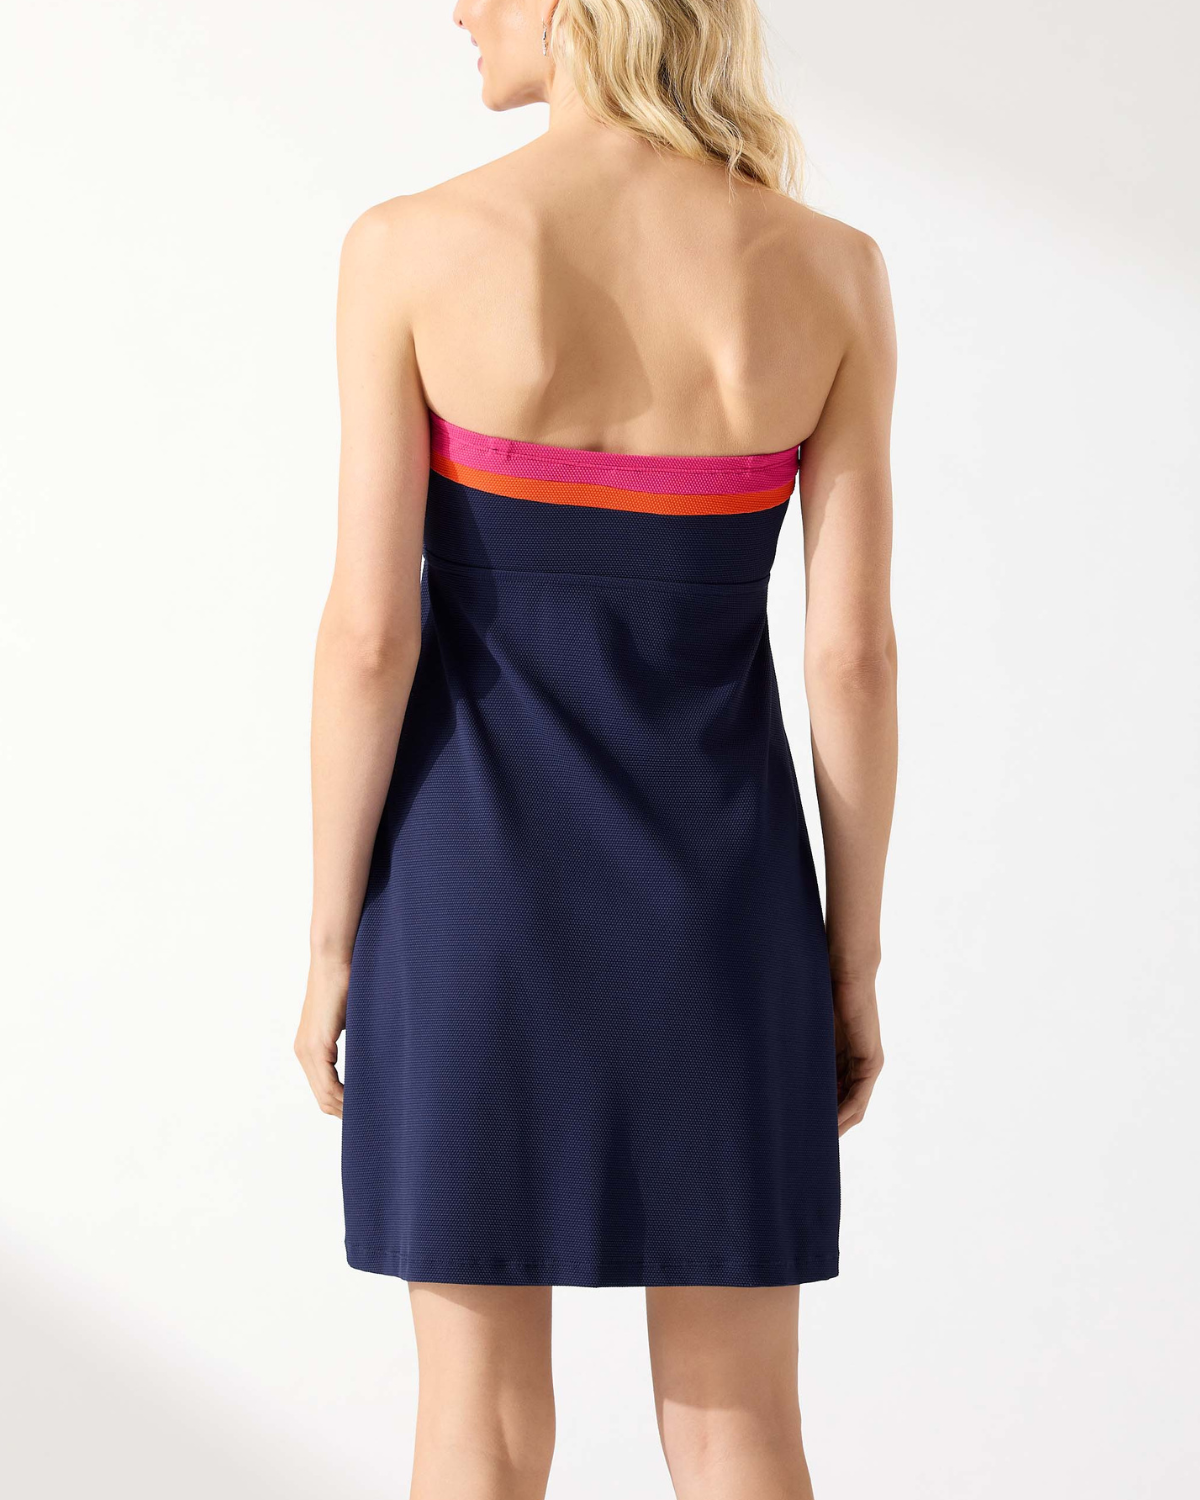 Model wearing a strapless bandeau spa dress with pockets in navy with a pink and orange stripe on the neckline